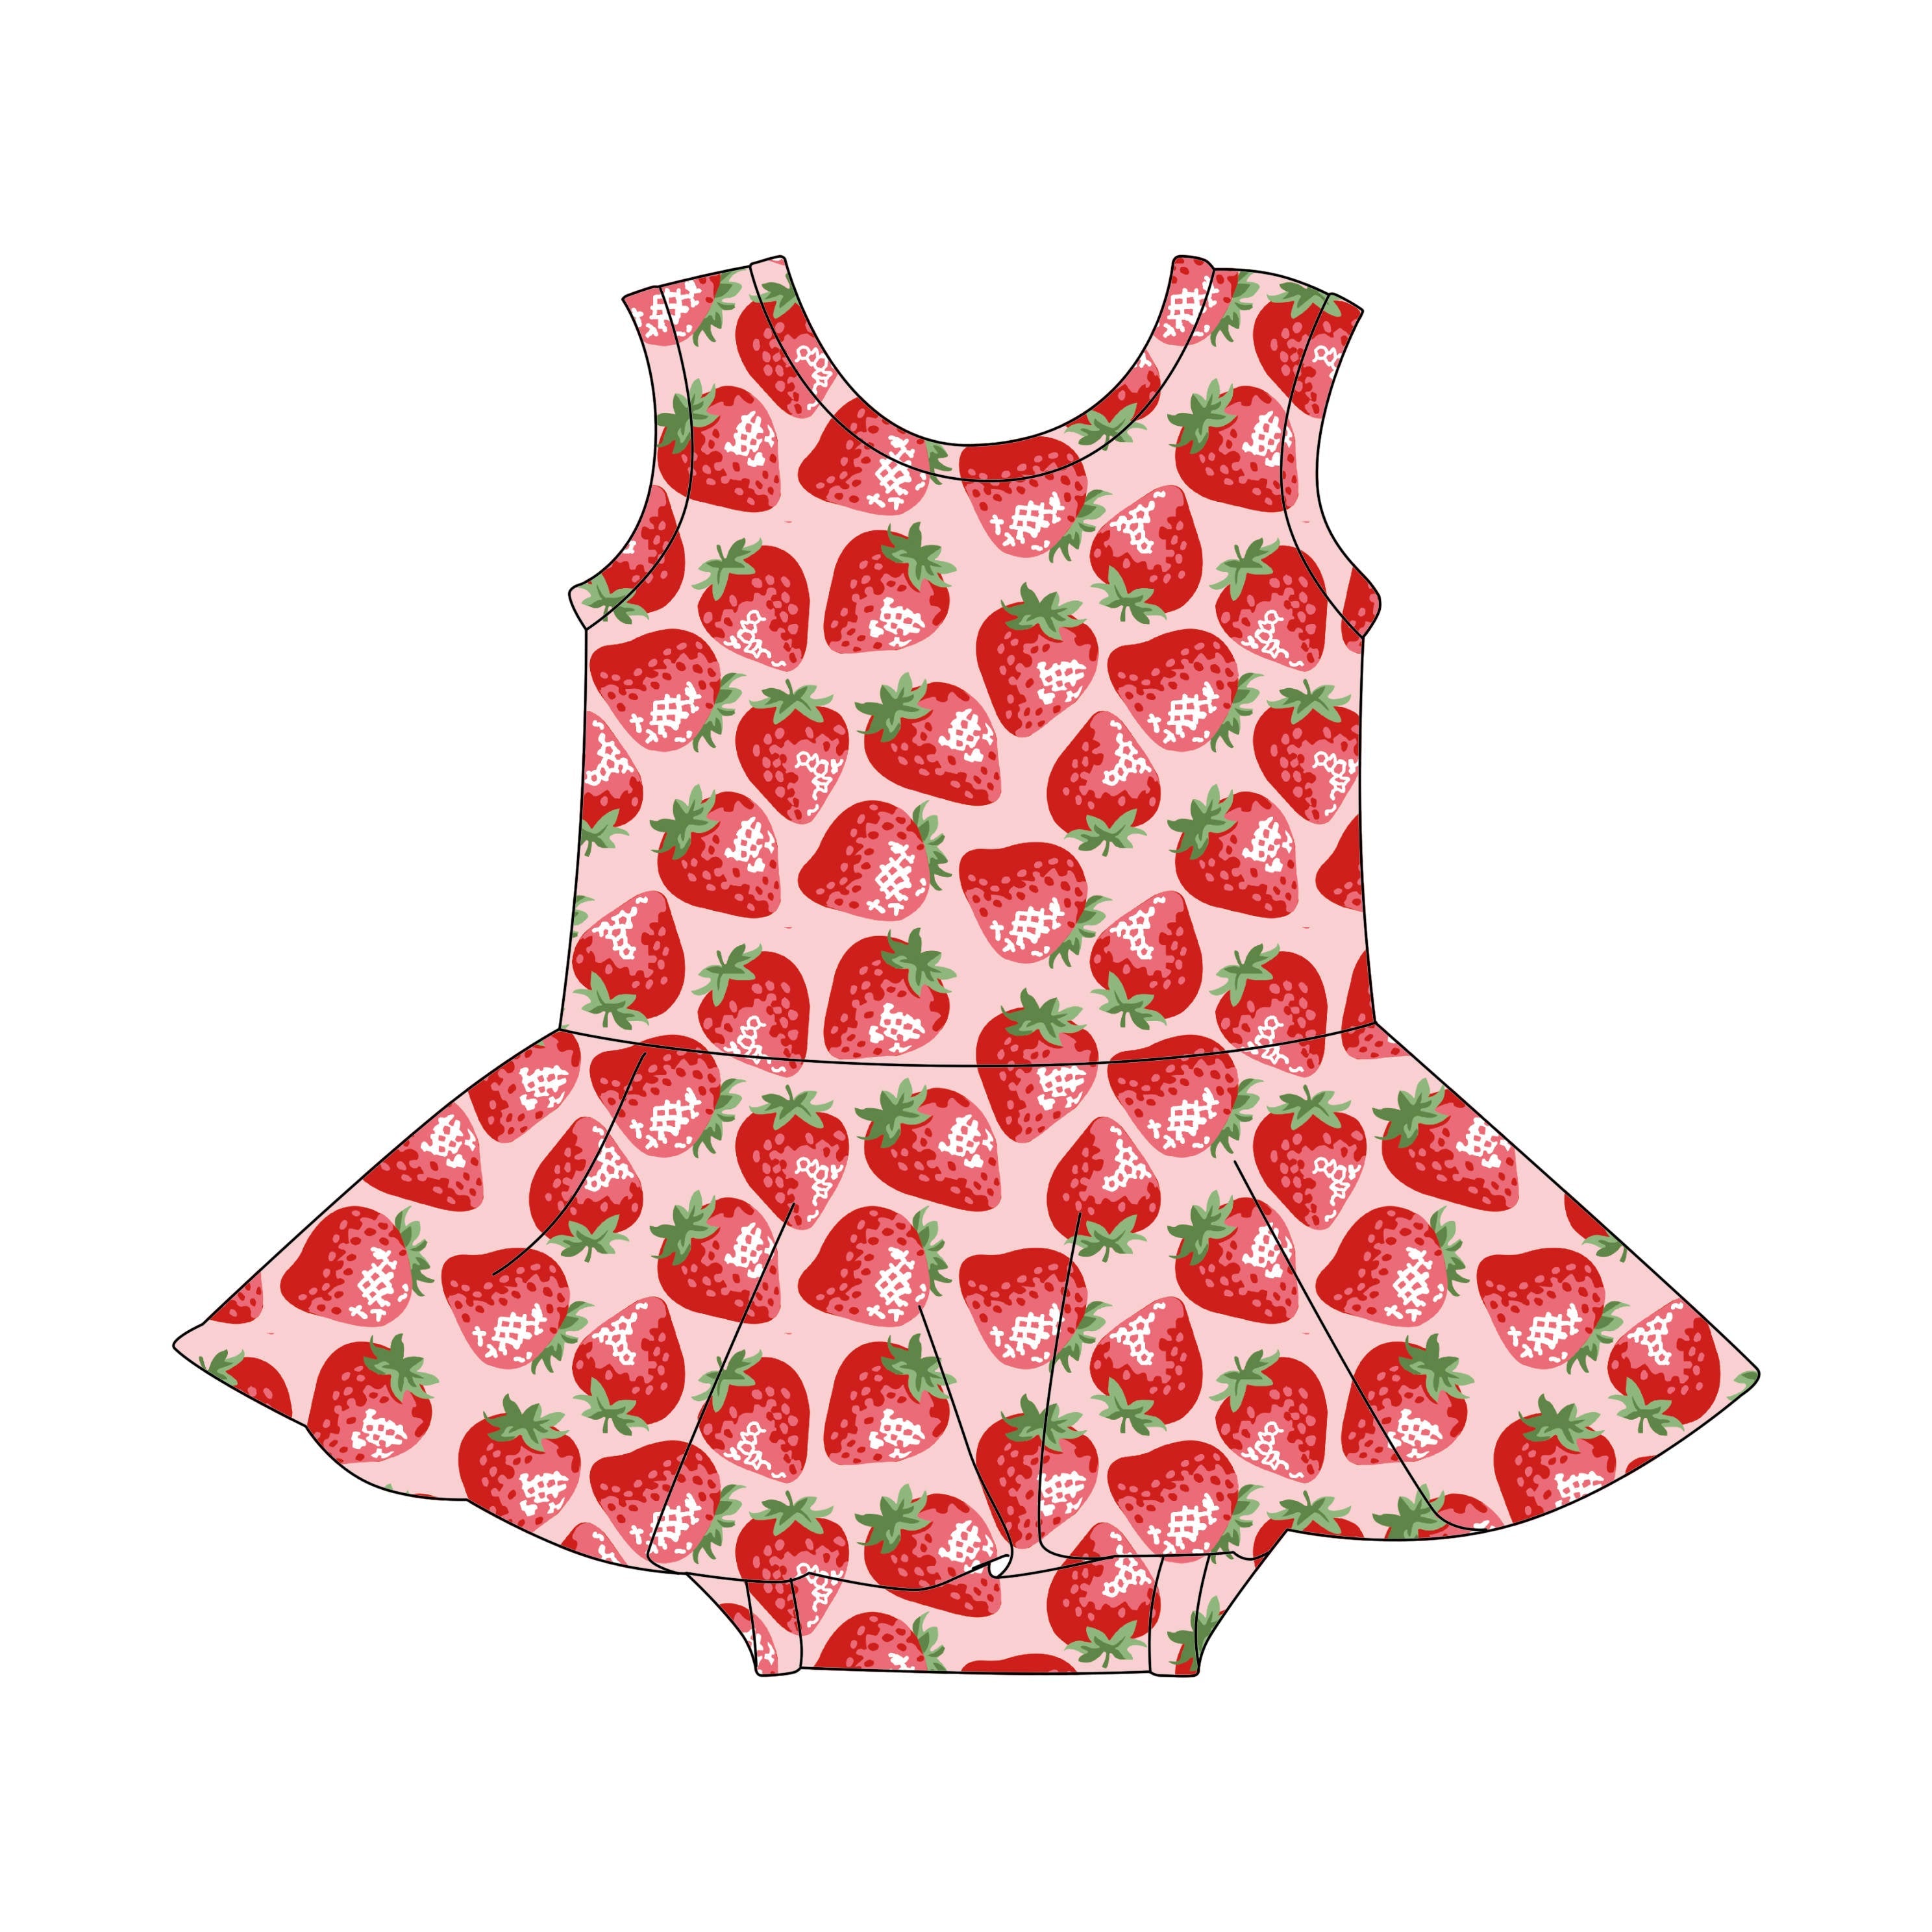 Strawberry Sugar - One Piece Skirt Bathing Suit PRE-ORDER-Bathing suits-Elie’s Bows